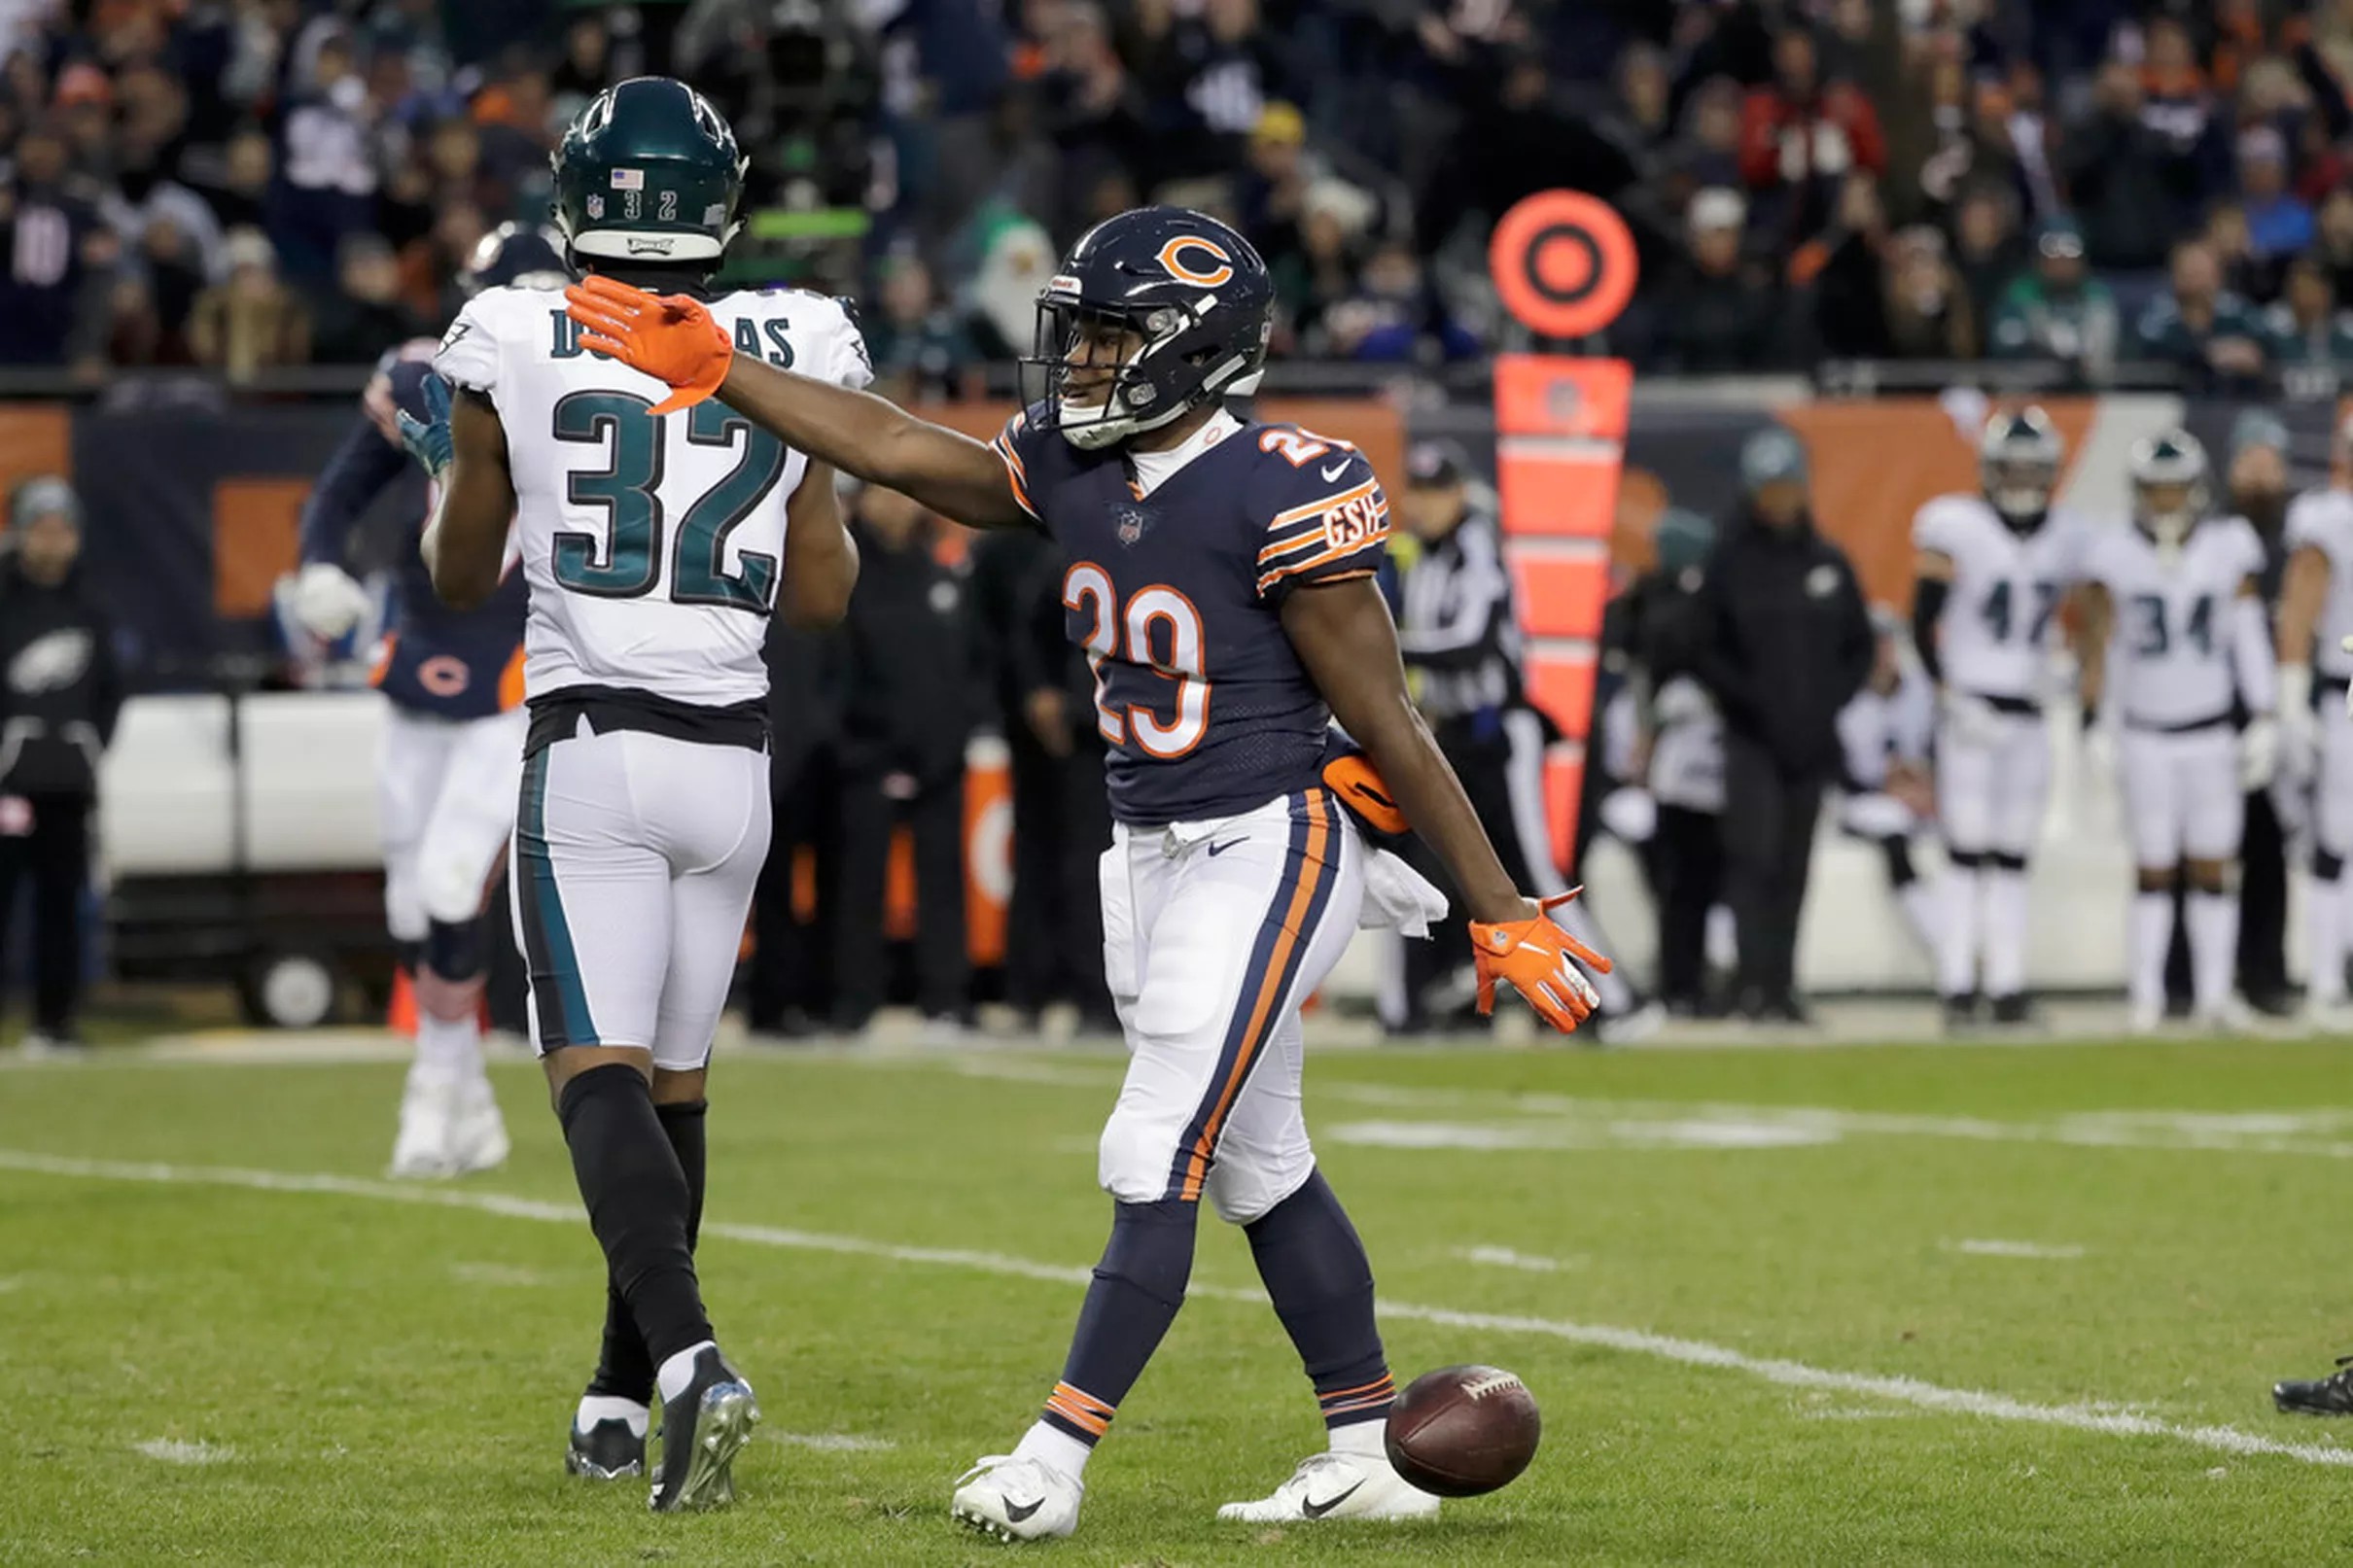 Bears vs. Eagles Live updates and highlights for Week 9